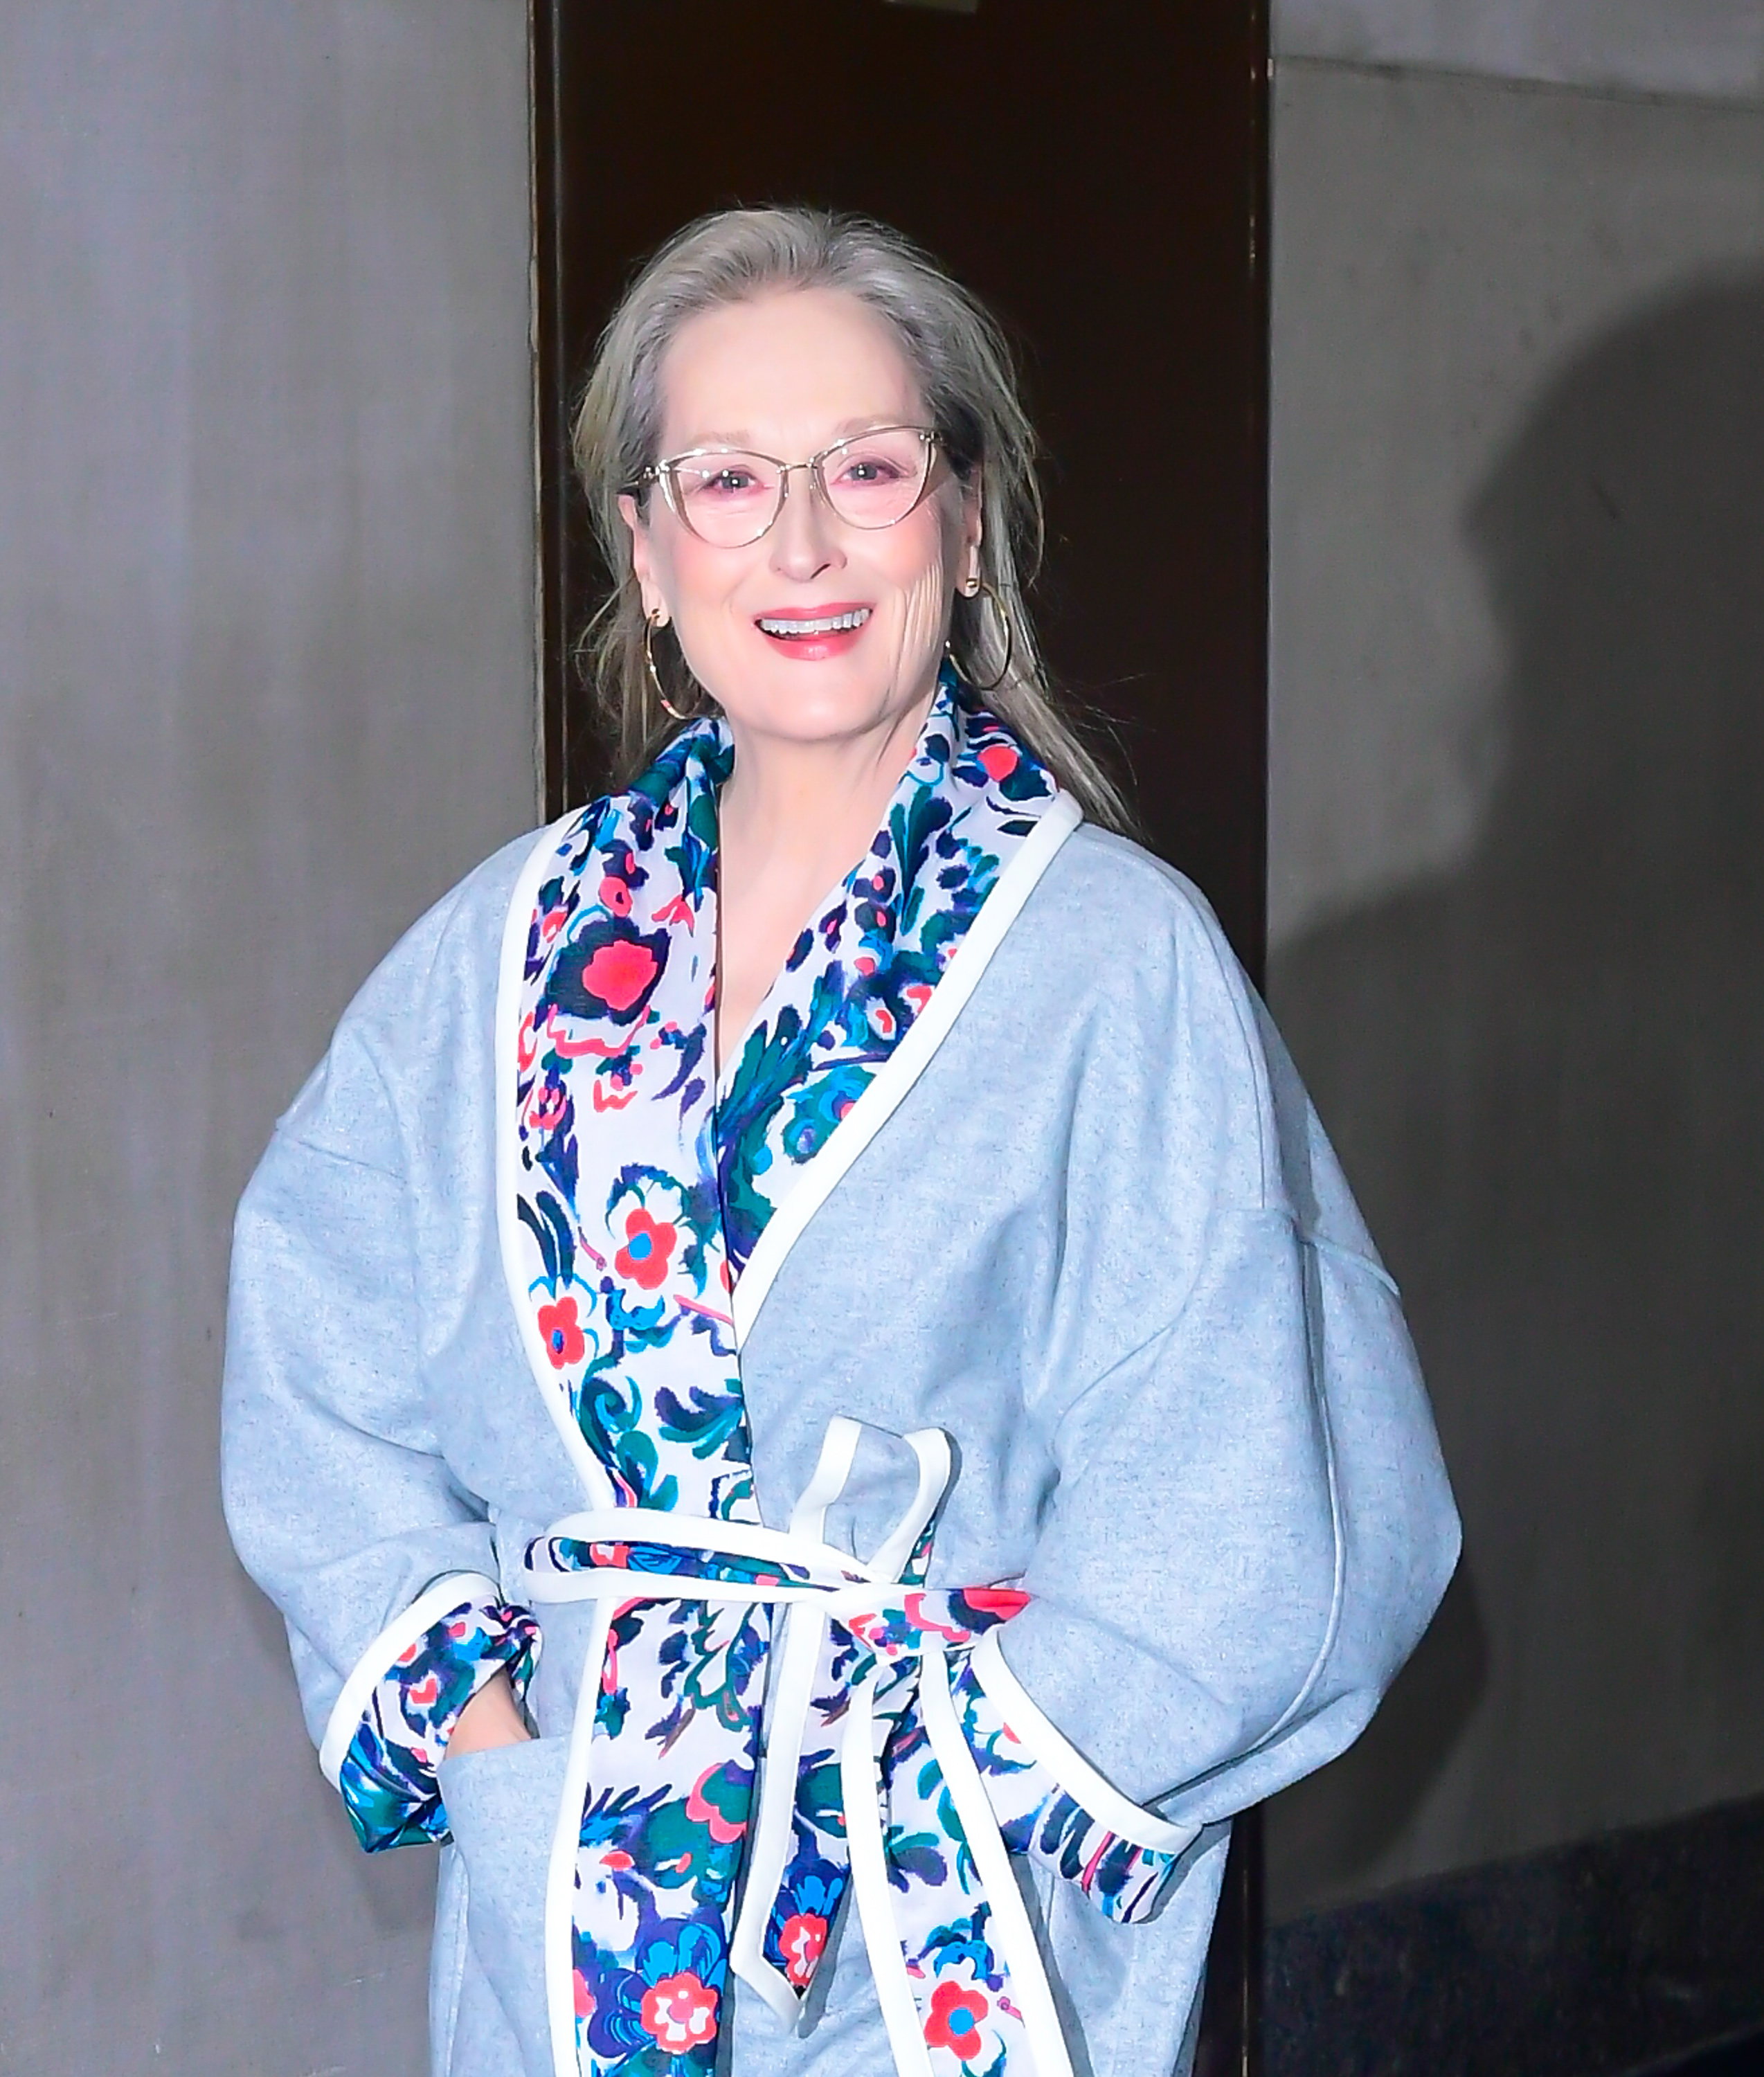 Meryl Streep in New York City on December 7, 2021 | Source: Getty Images